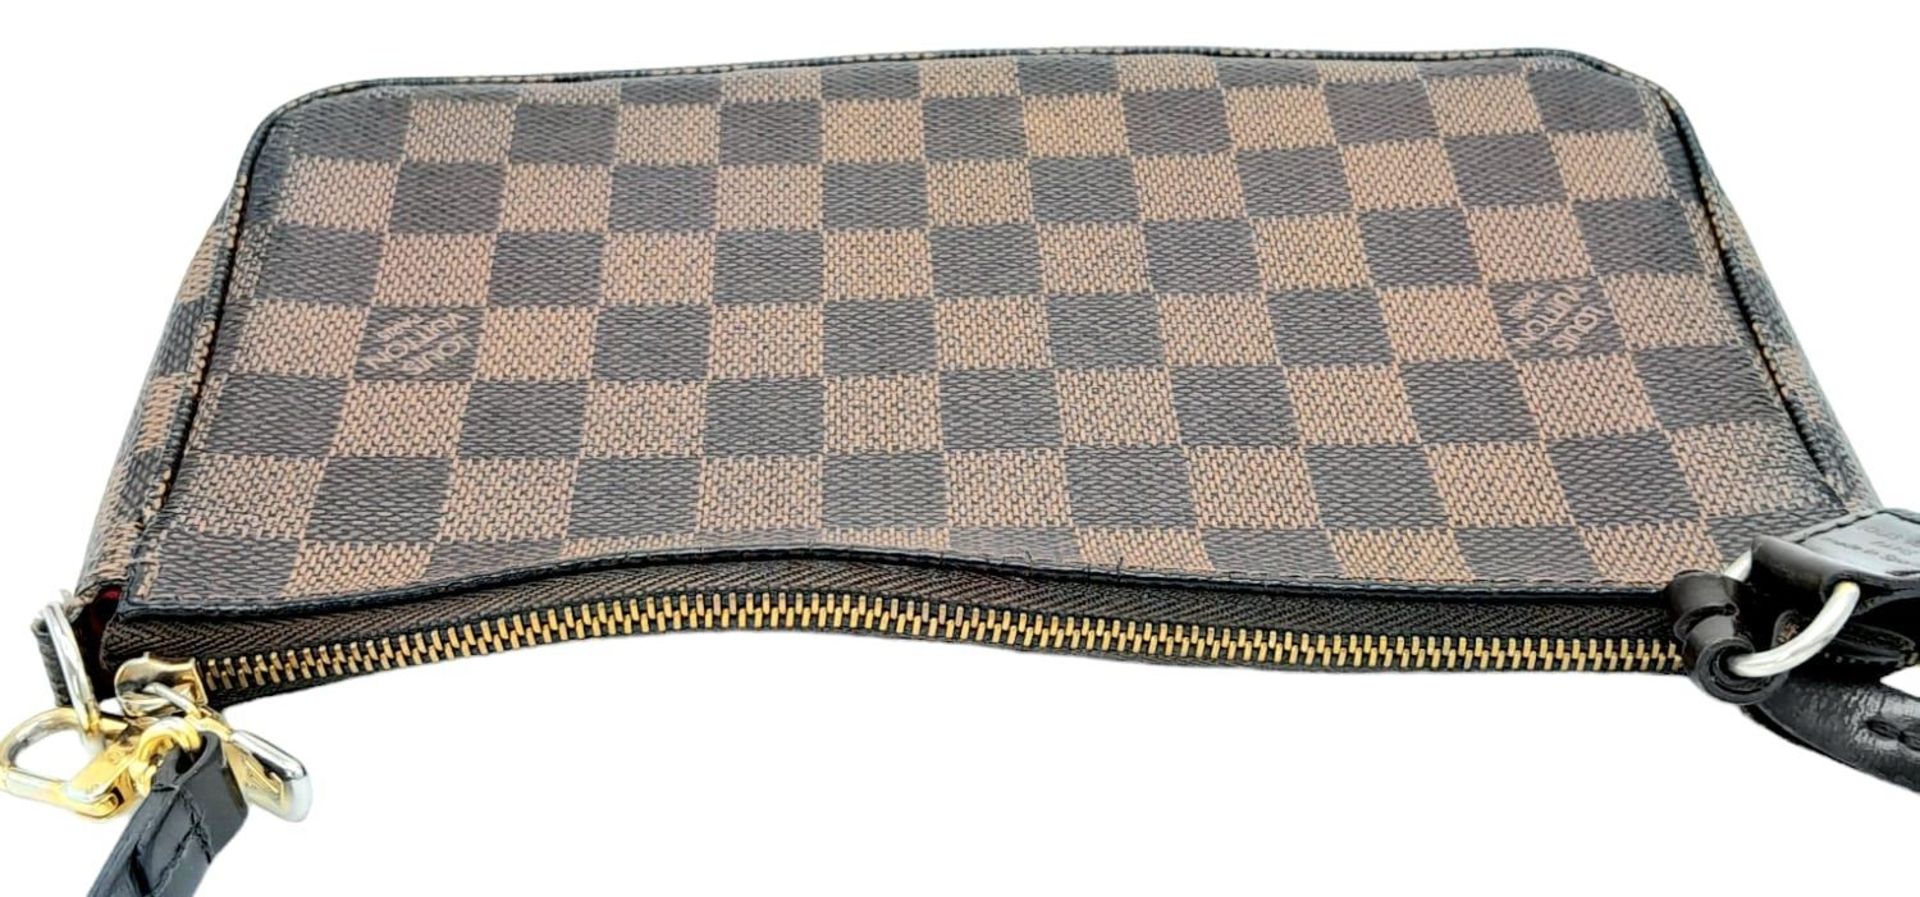 A Louis Vuitton Damier Ebene Pochette with Leather Exterior. Top Zip Closure. Red Fabric Lining with - Image 4 of 7